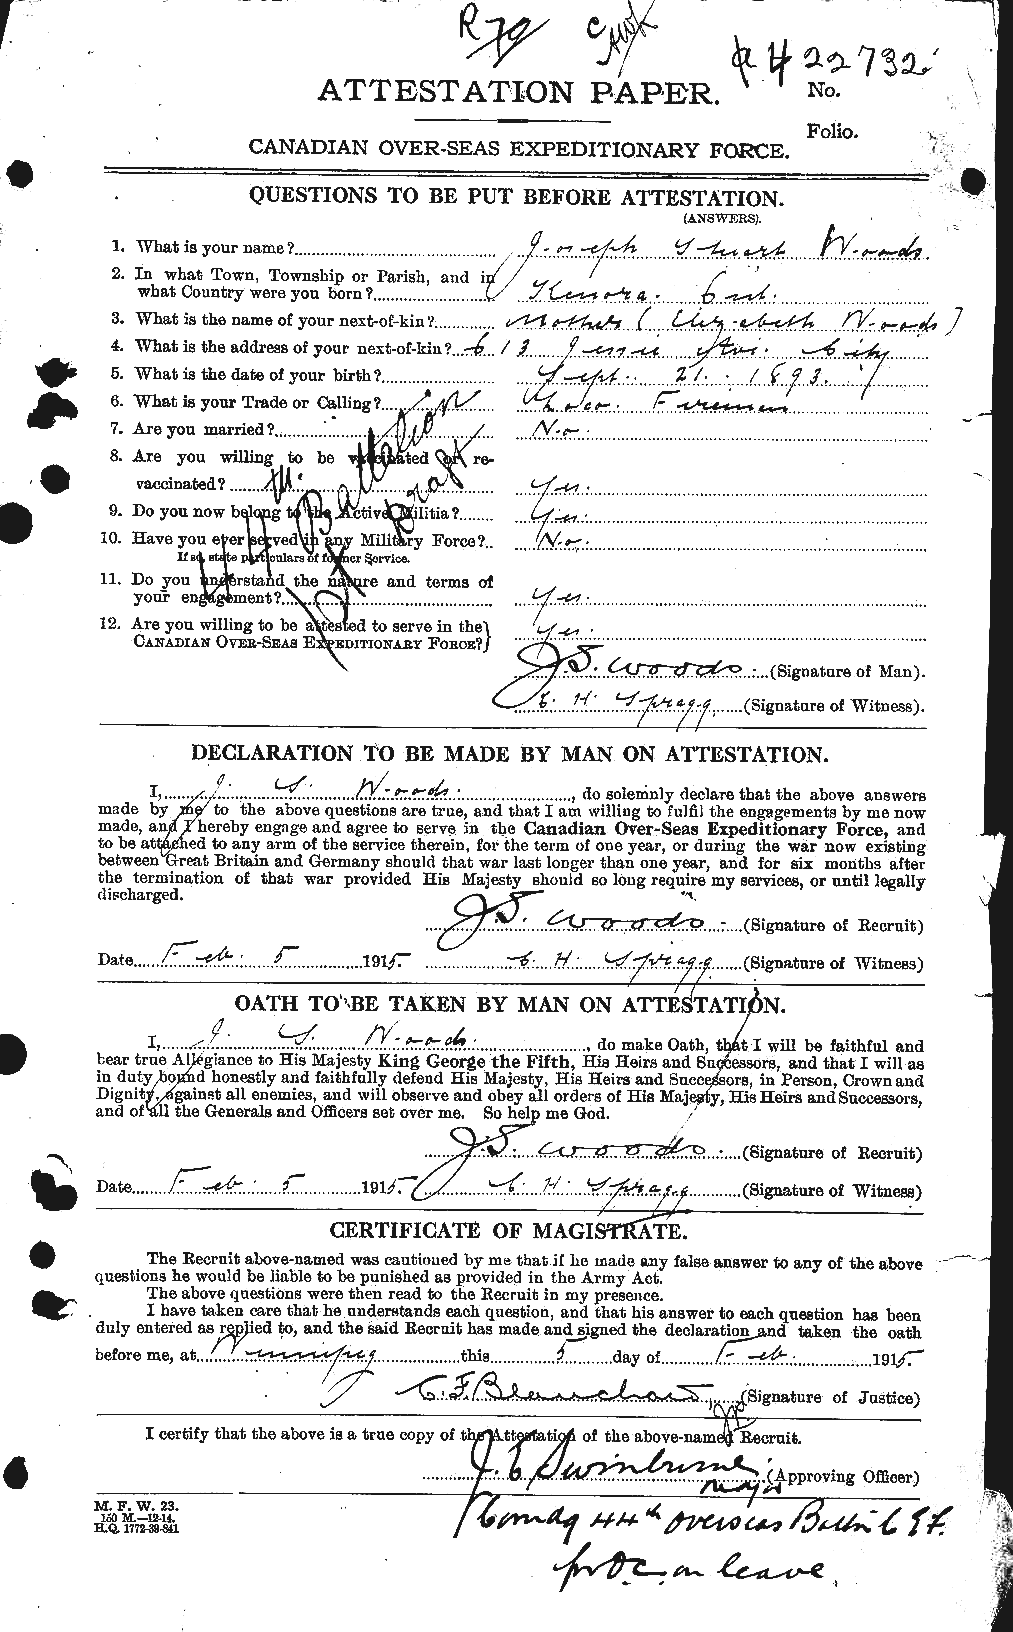 Personnel Records of the First World War - CEF 687910a